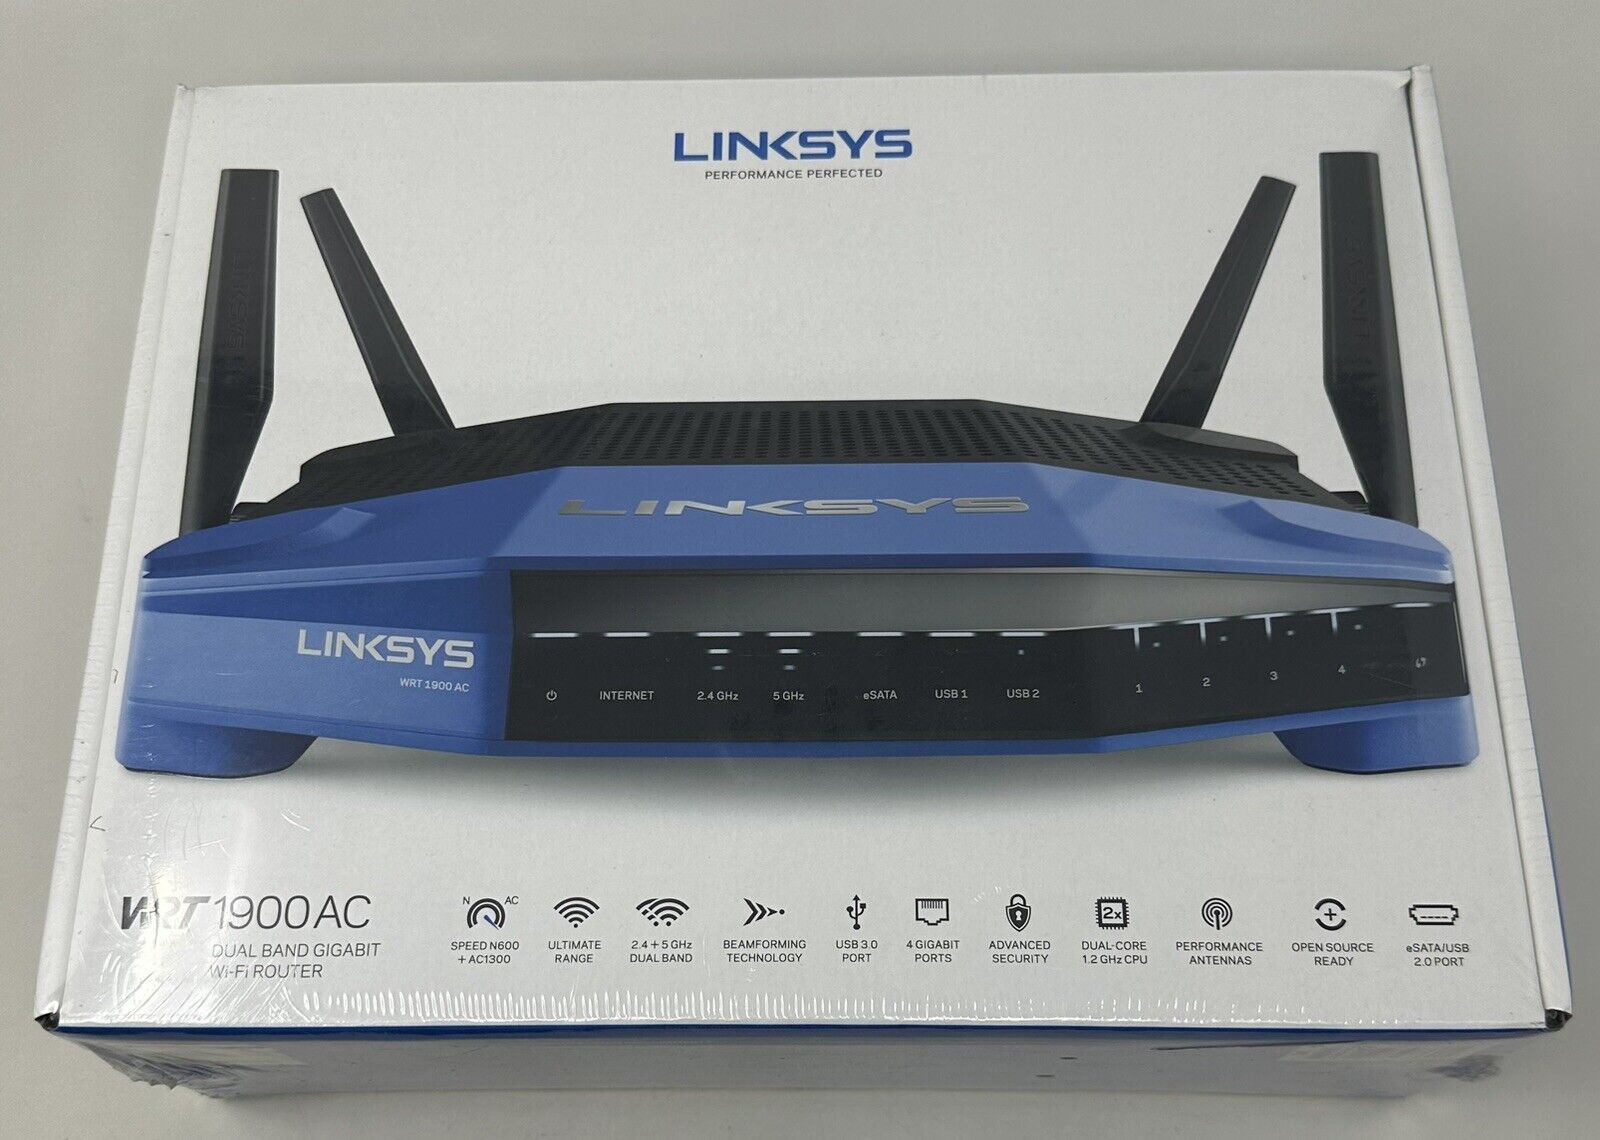 Linksys WRT1900AC 1300 Mbps 4 Port Dual-Band Wi-Fi Router New & Sealed